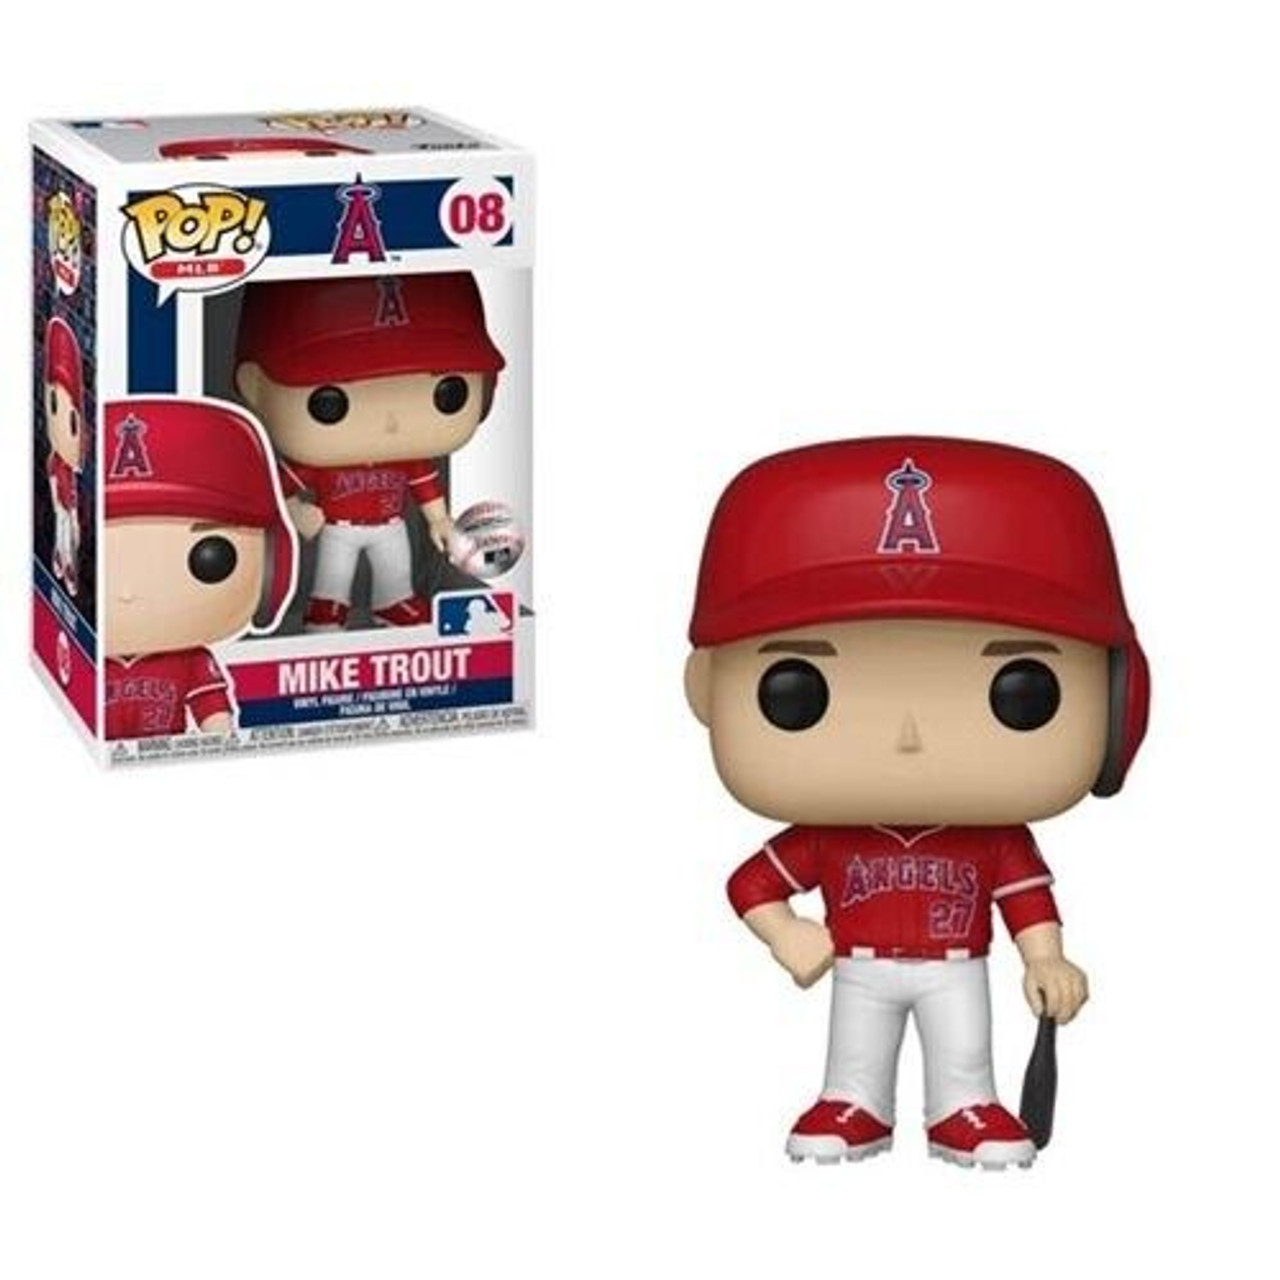 Mike Trout Signed Angels #08 Funko Pop! Vinyl Figure (MLB)